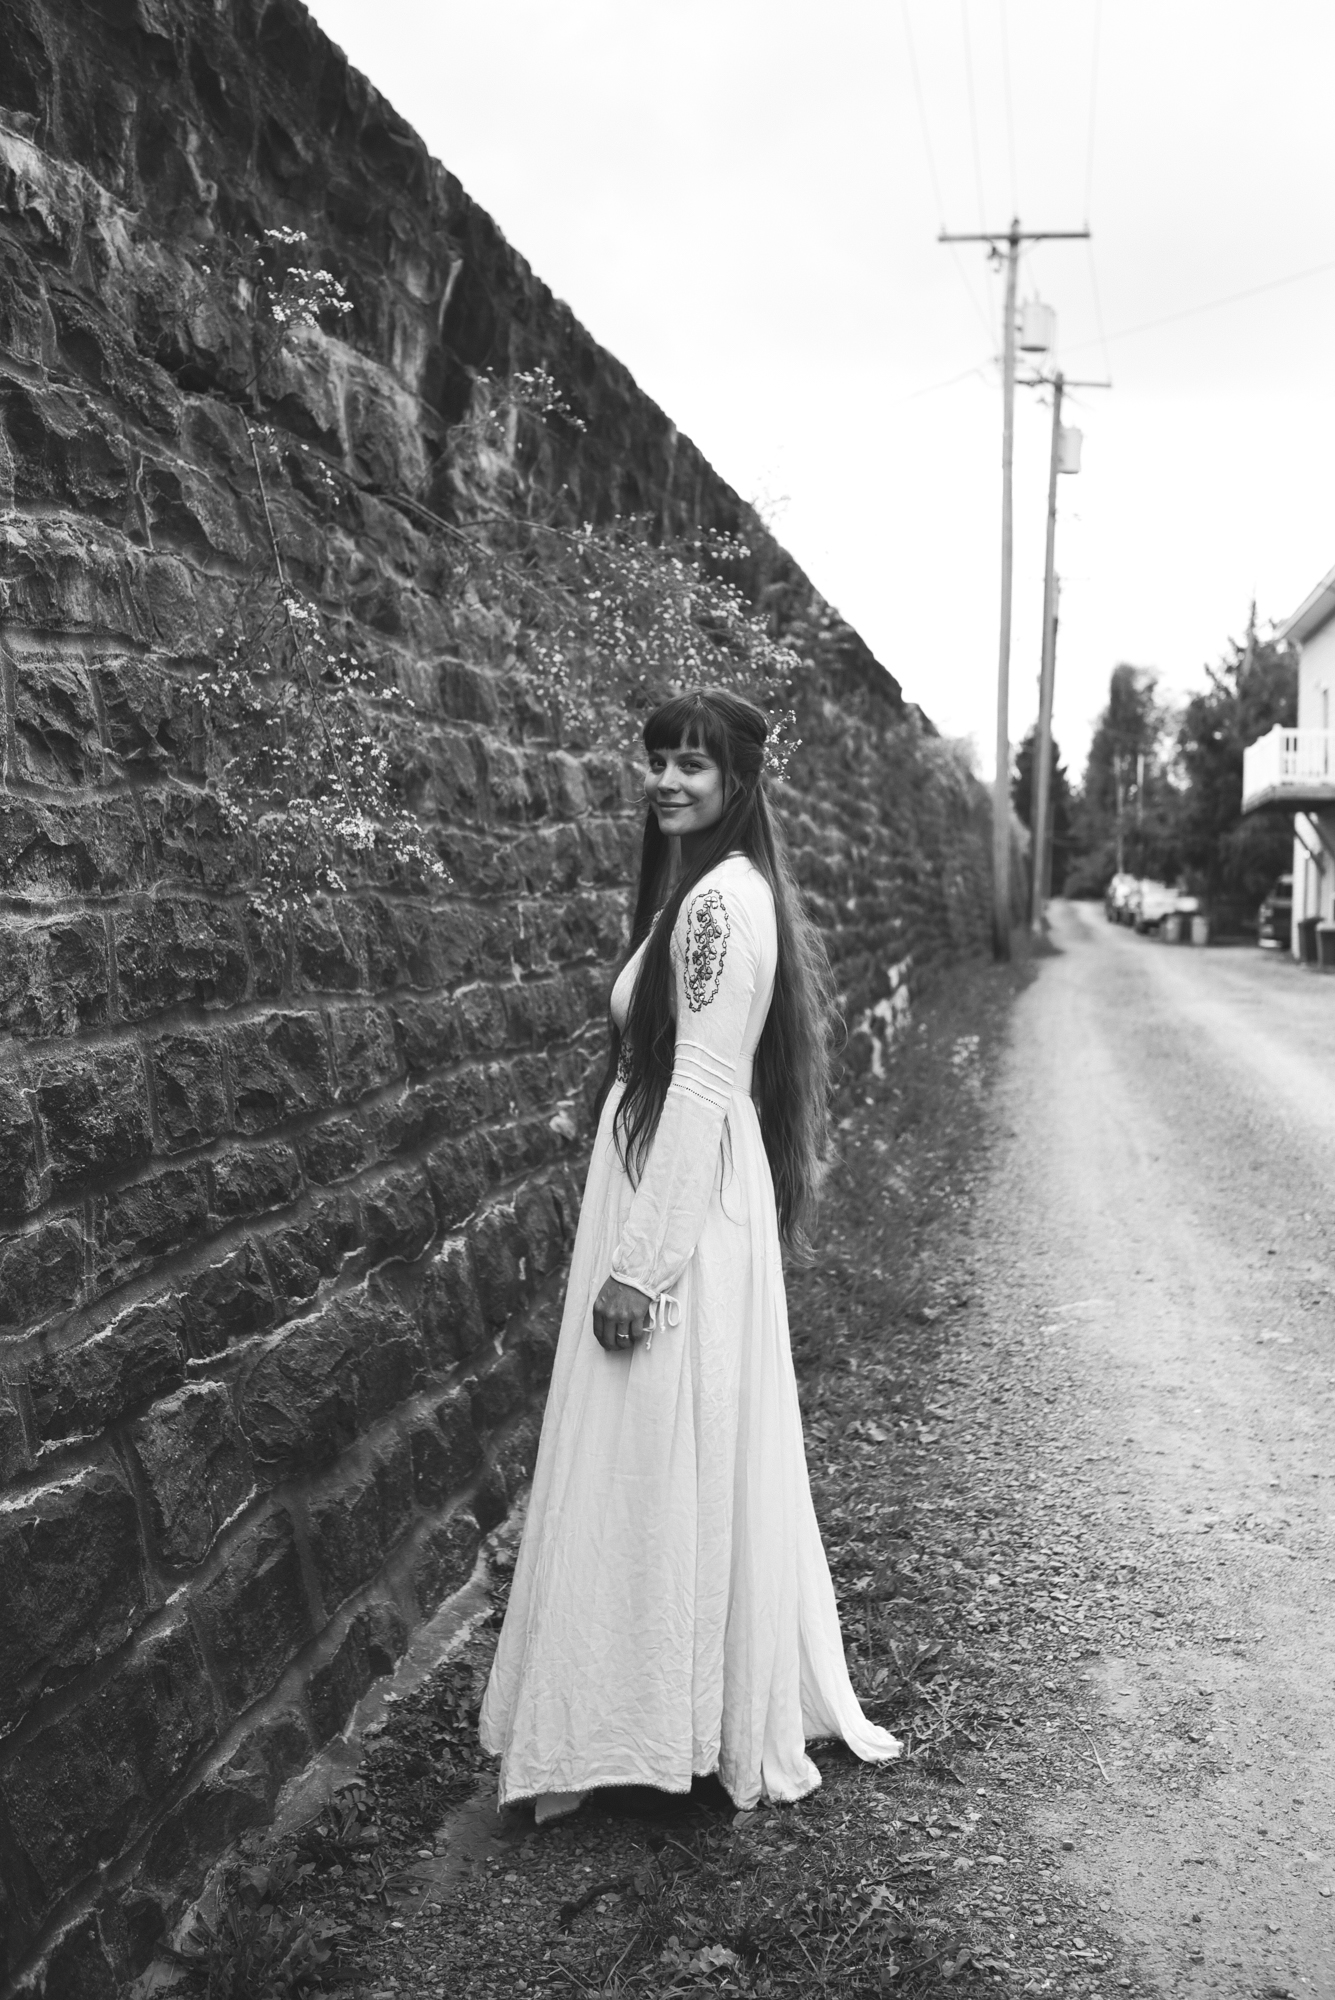  Mountains, Outdoors, Rustic, West Virginia, Maryland Wedding Photographer, DIY, Casual, Bride posing and smiling before ceremony, Romantic and Boho bride, black and white photo 